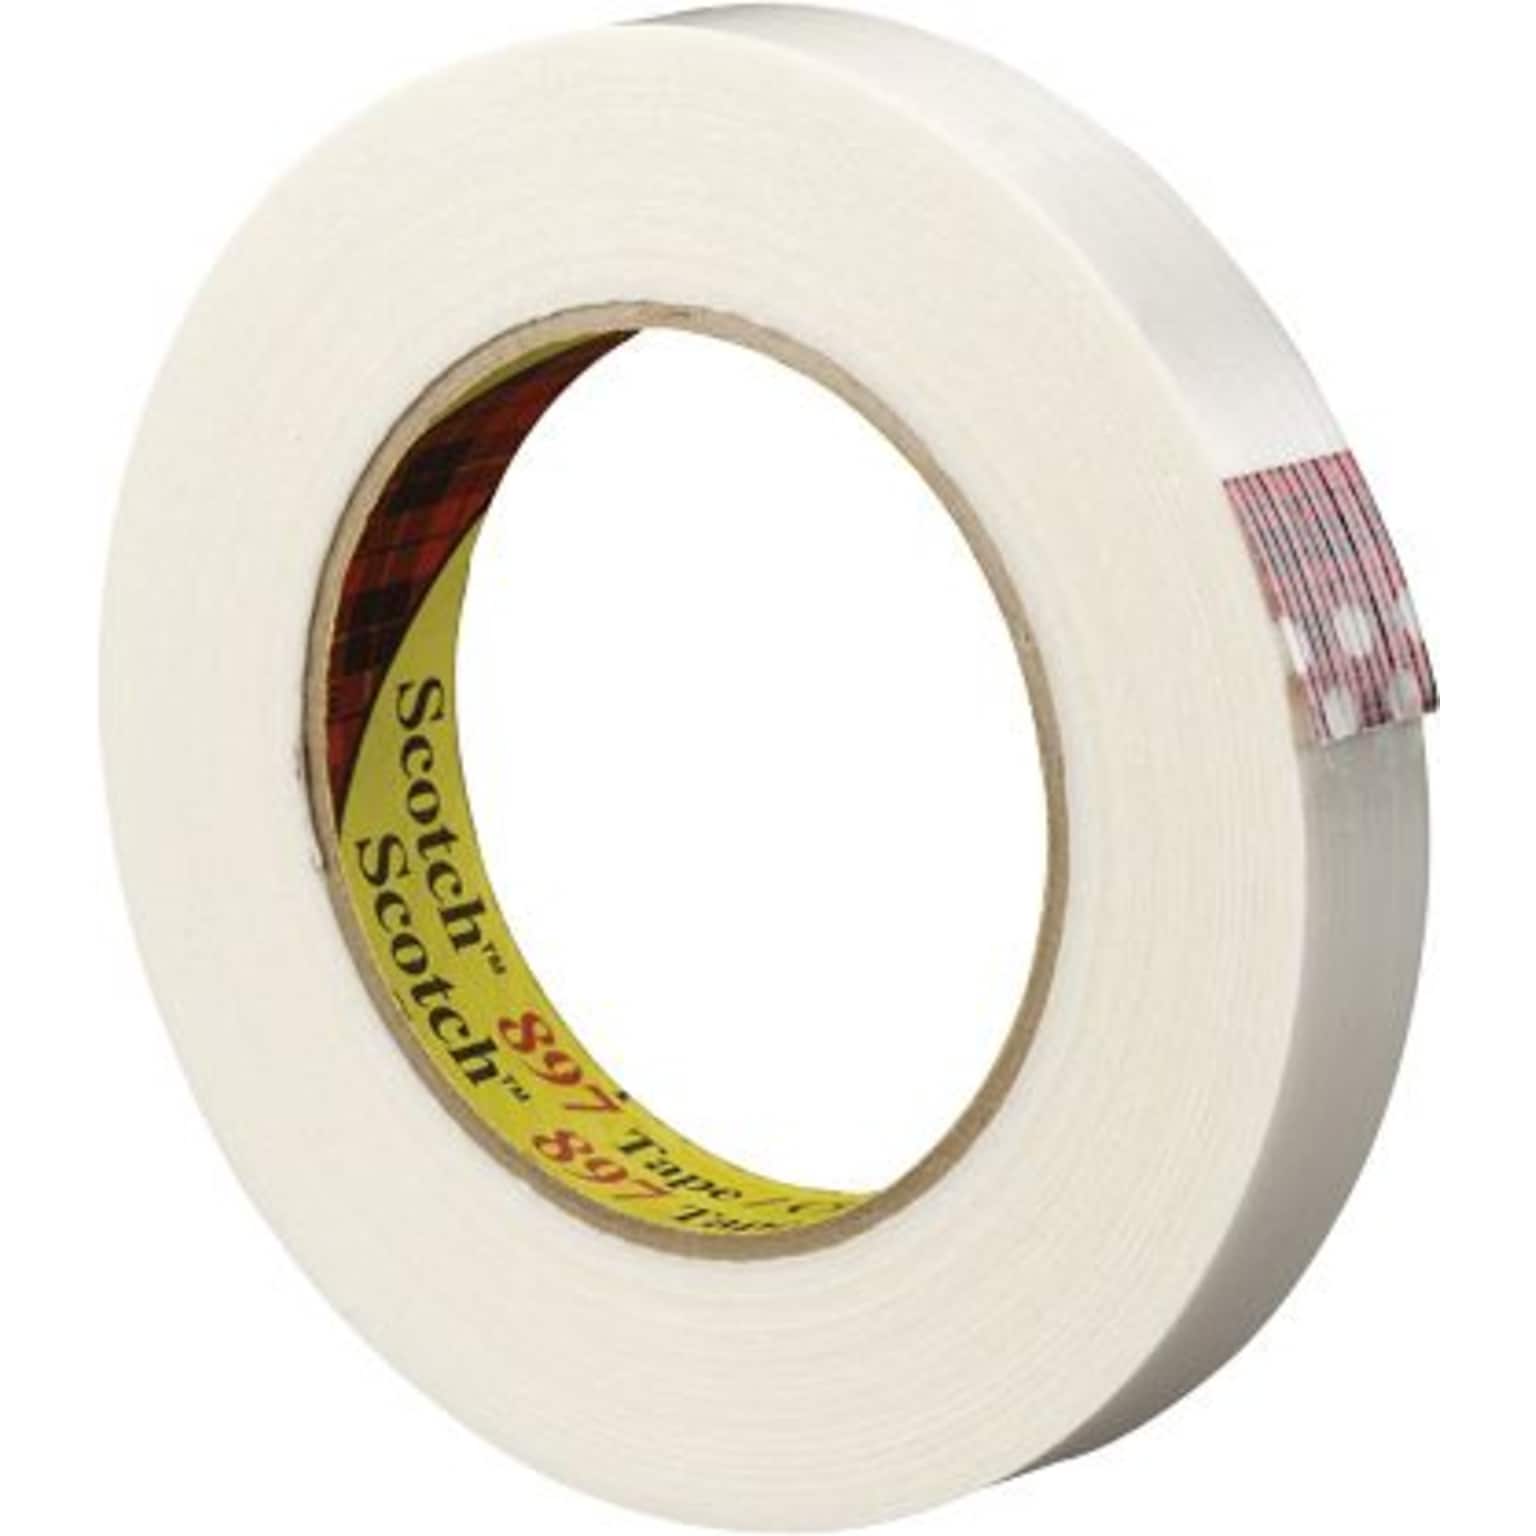 3M 897 6.0 Mil Strapping Tape, 2 x 60 yds., Clear, 6/Case (T9178976PK)